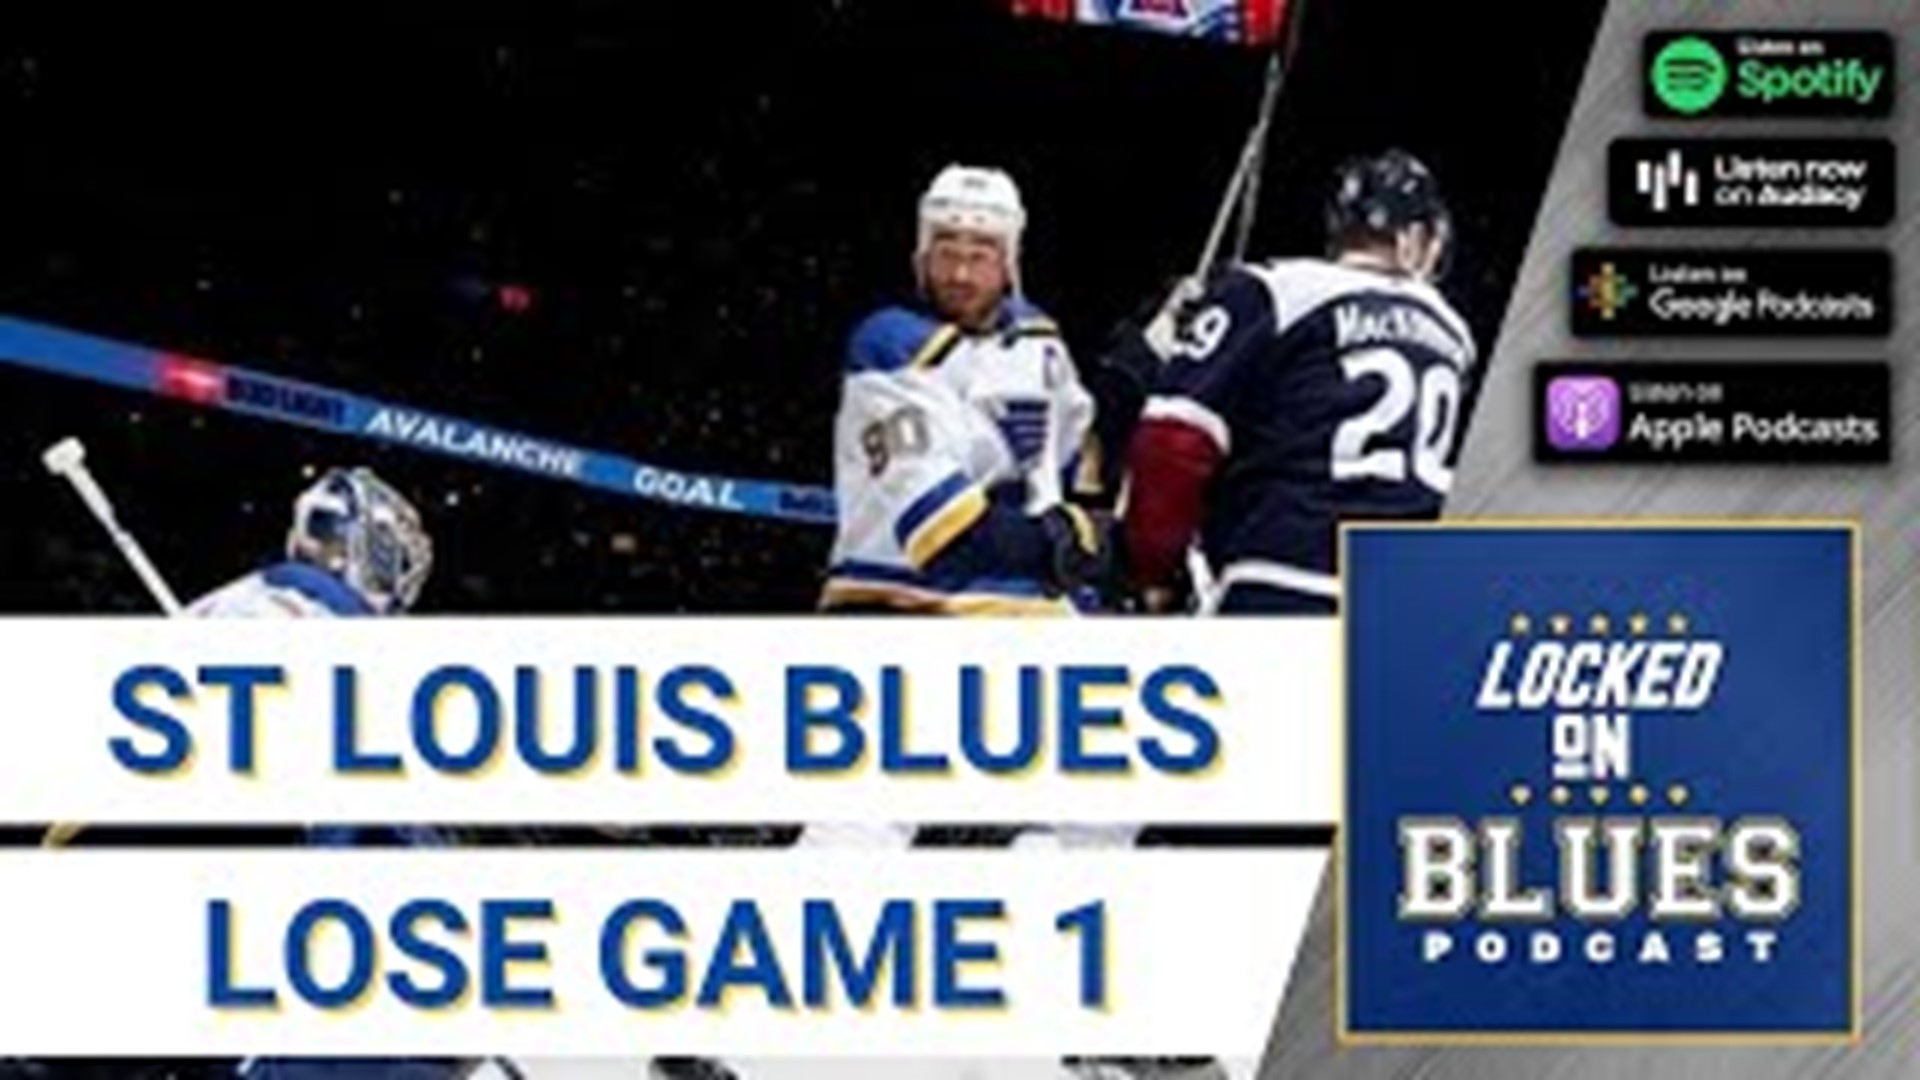 Recap of the St. Louis Blues' tough loss in game one against the Colorado Avalance. Josh Hyman discusses the strong performances of Binnington and O'Reilly.